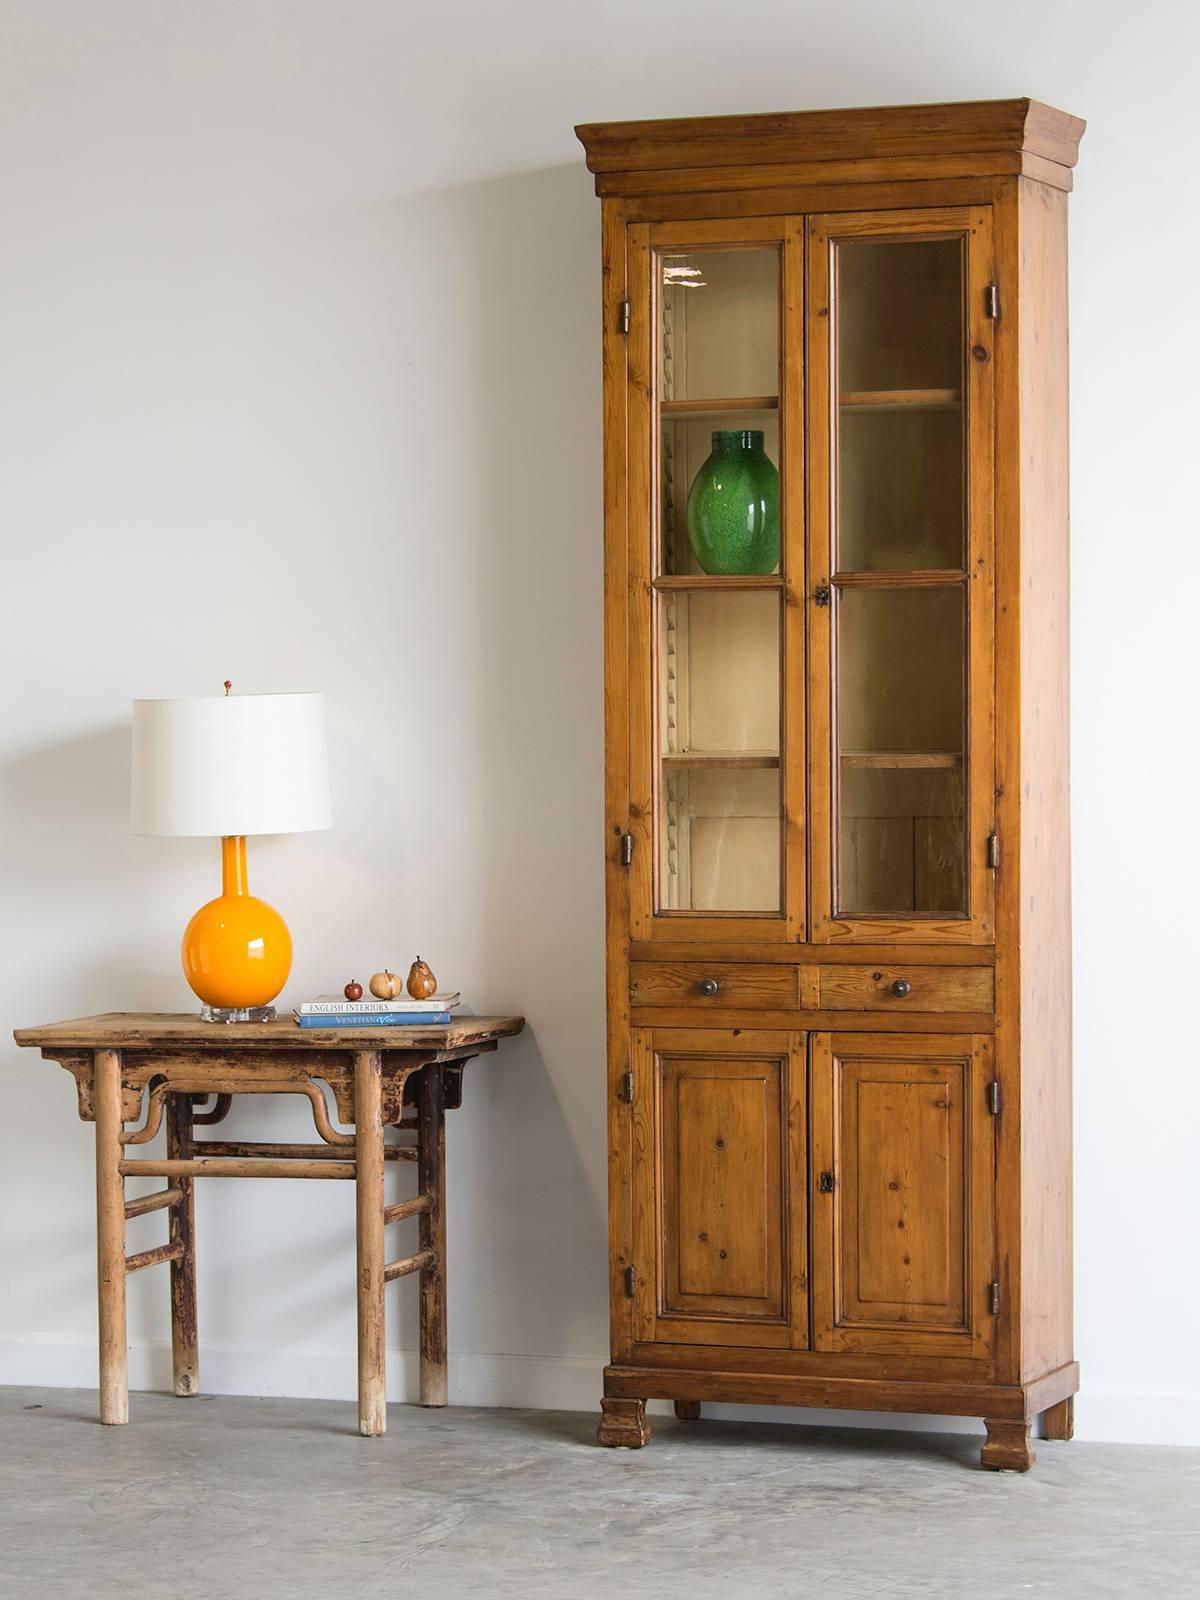 Receive our new selections direct from 1stdibs by email each week. Please click Follow Dealer below and see them first!

An exceptionally tall and slender French Louis Philippe period pine bookcase, circa 1850. One of the most impressive aspects